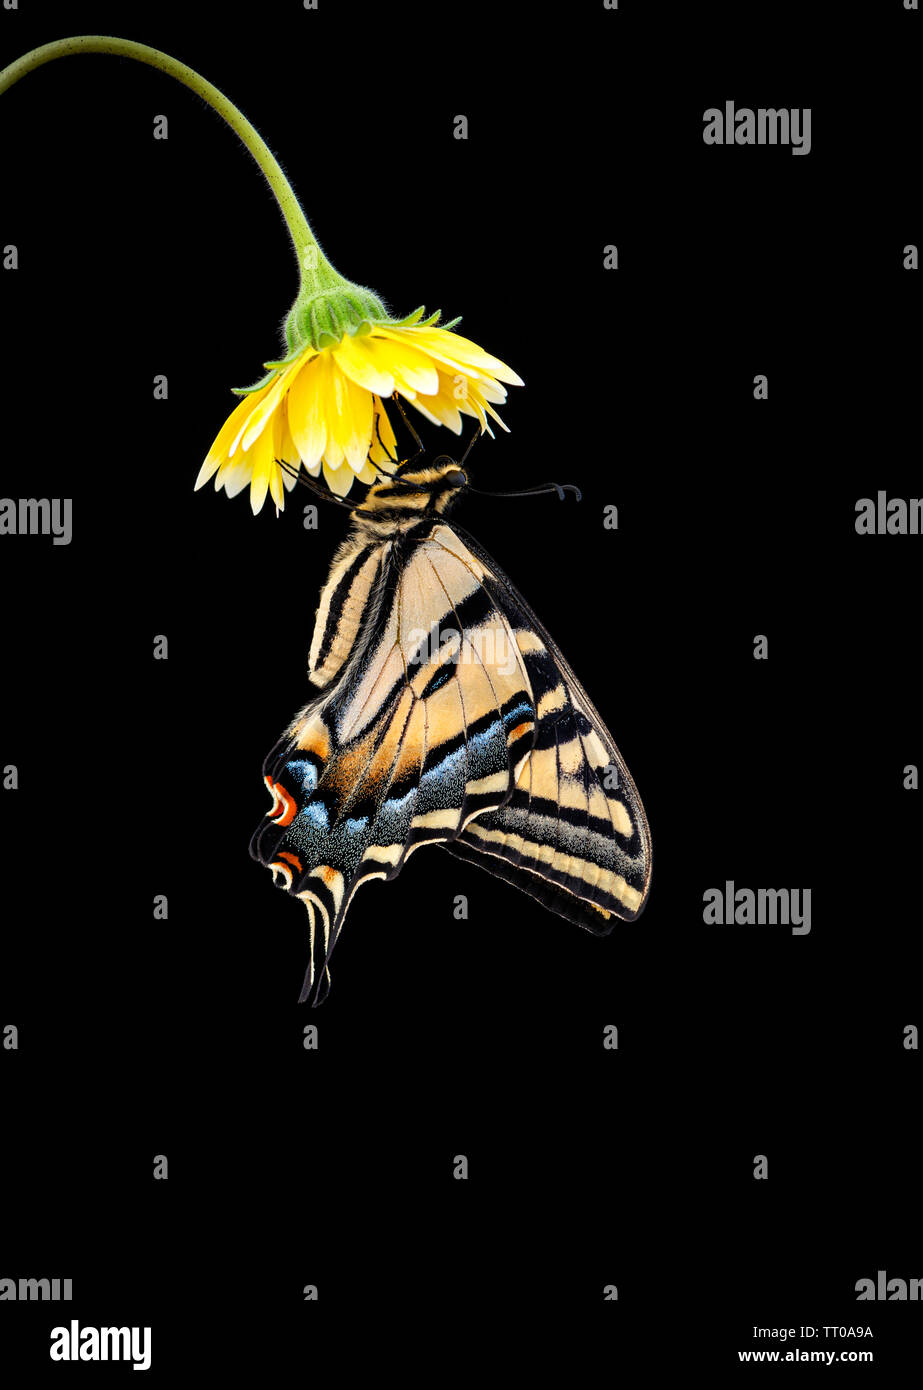 A Western Tiger Swallowtail (Papilio rutulus) hanging from a yellow flower on a black background Stock Photo